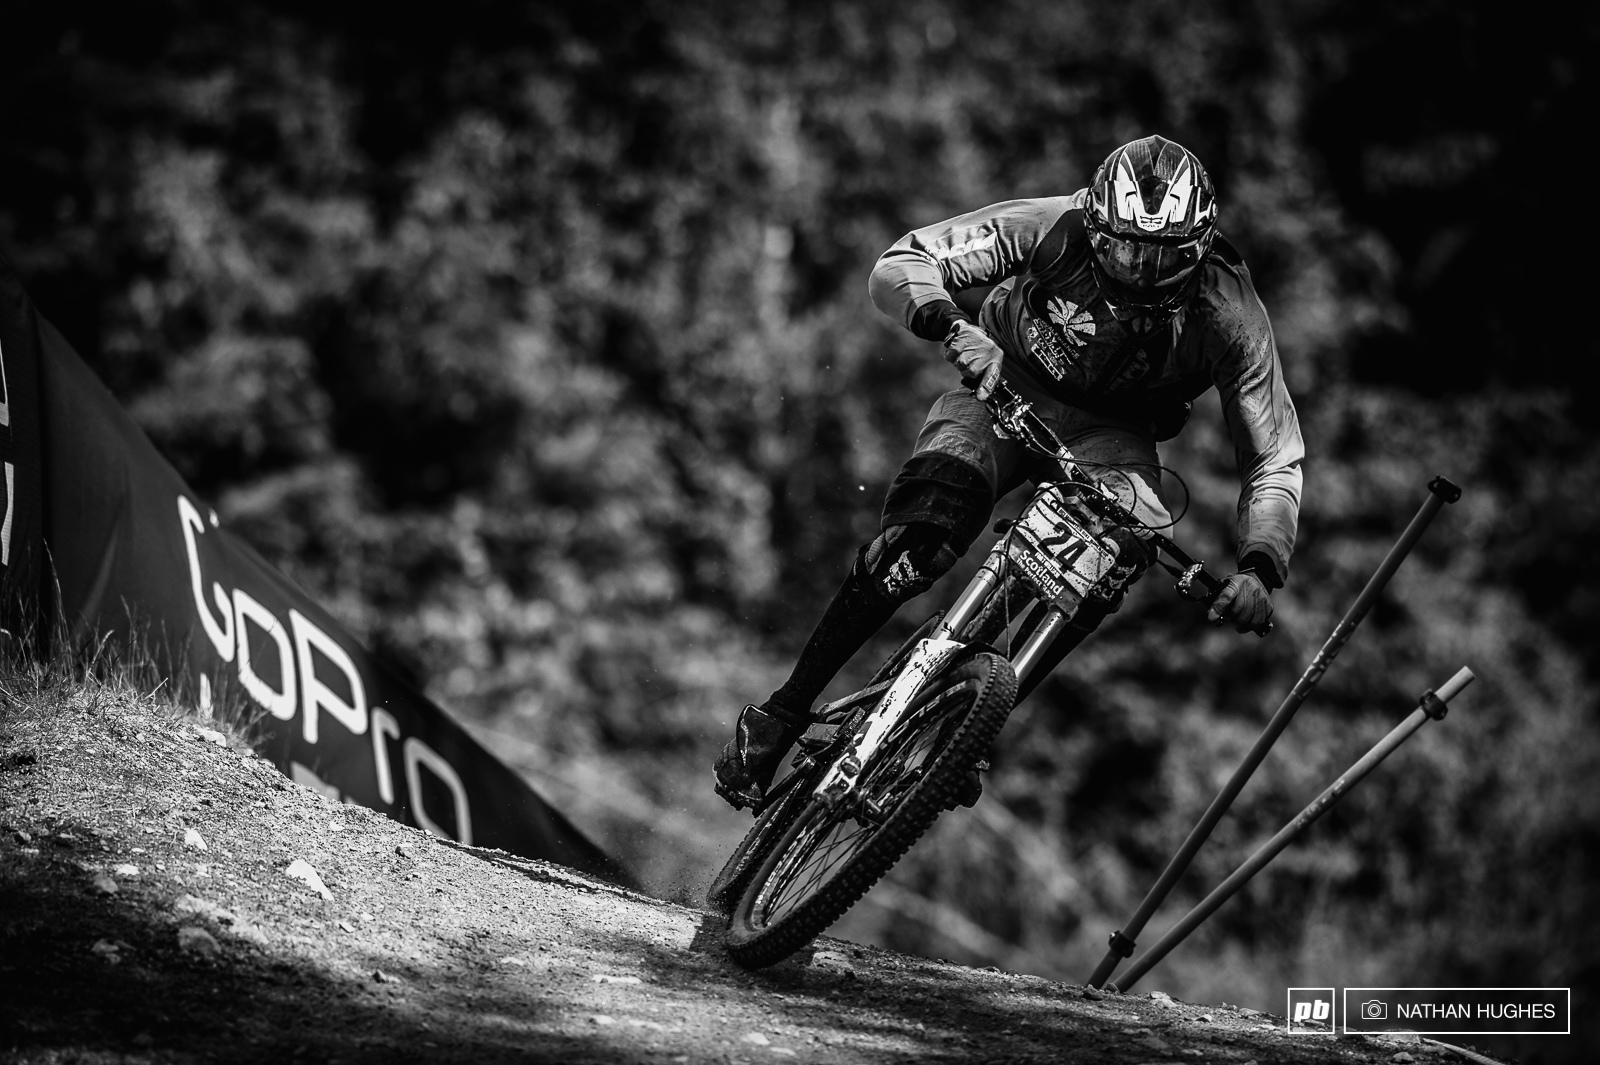 There were plenty of Frenchman fighting for top 20 spots this weekend... Of the challengers was youngster Benoit Coulanges of Roc VTT Oz-en-Oisans who charged into an incredible 15th place just behind far more experienced countryman Florent Payet.